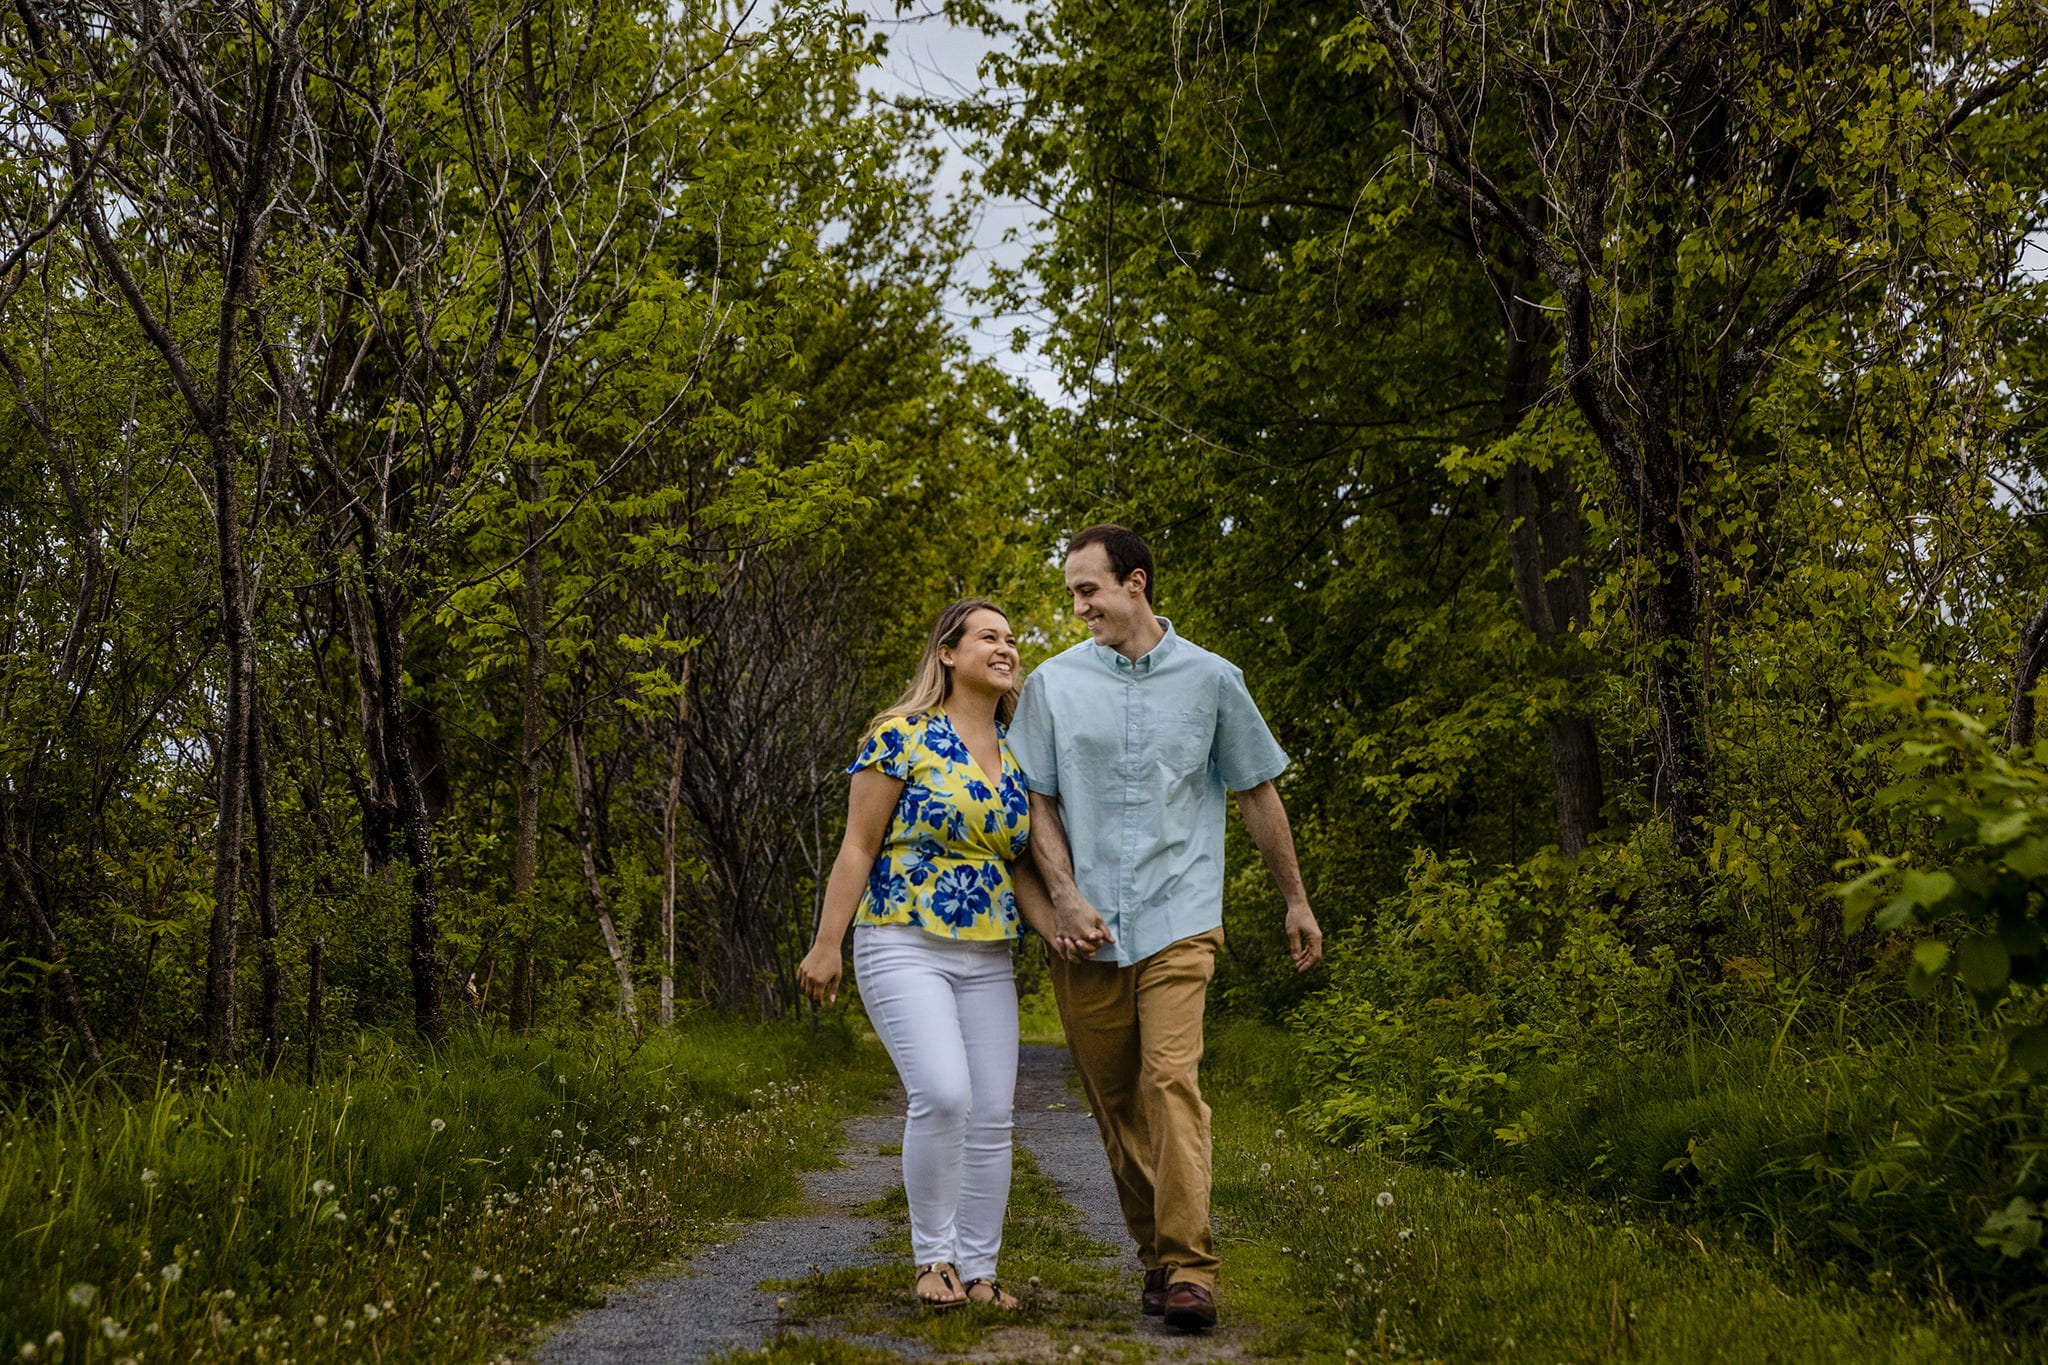 man and woman laugh while walking and holding hands on forest path